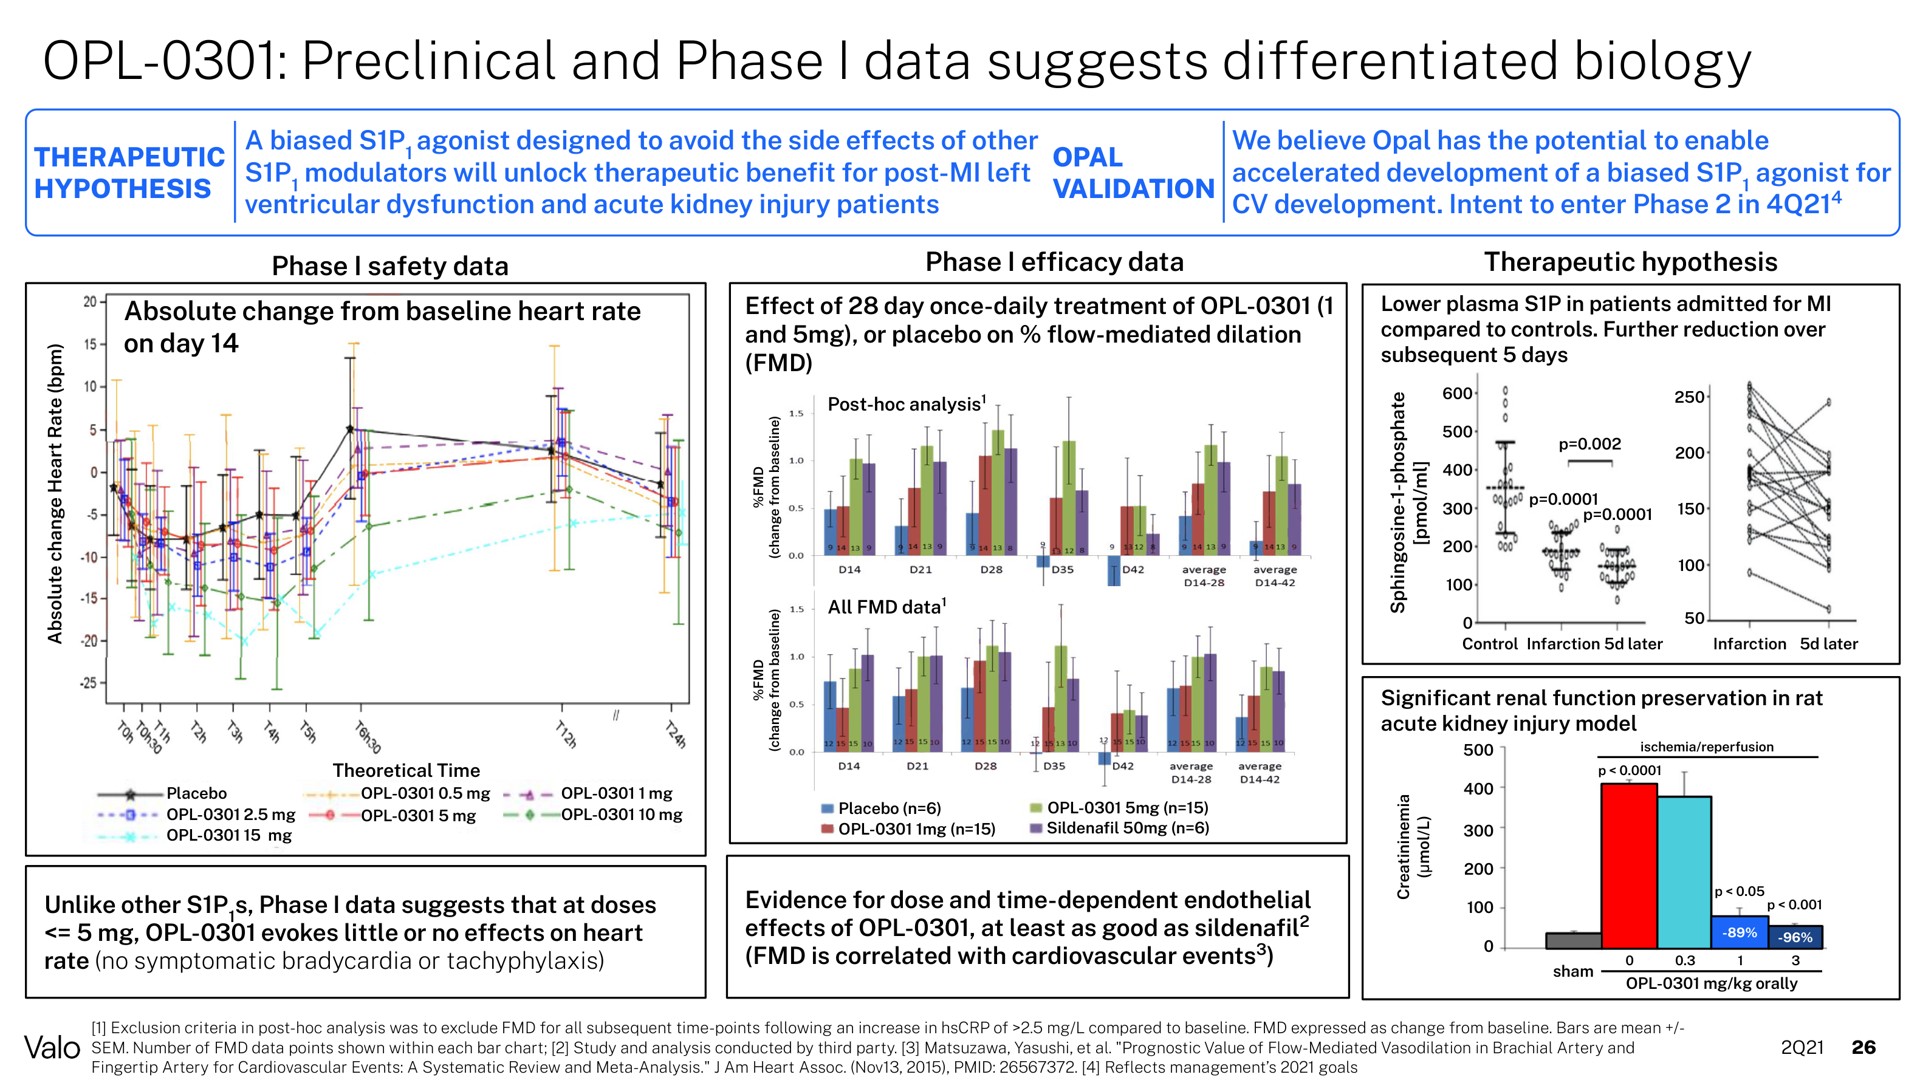 preclinical and phase i data suggests differentiated biology | Valo